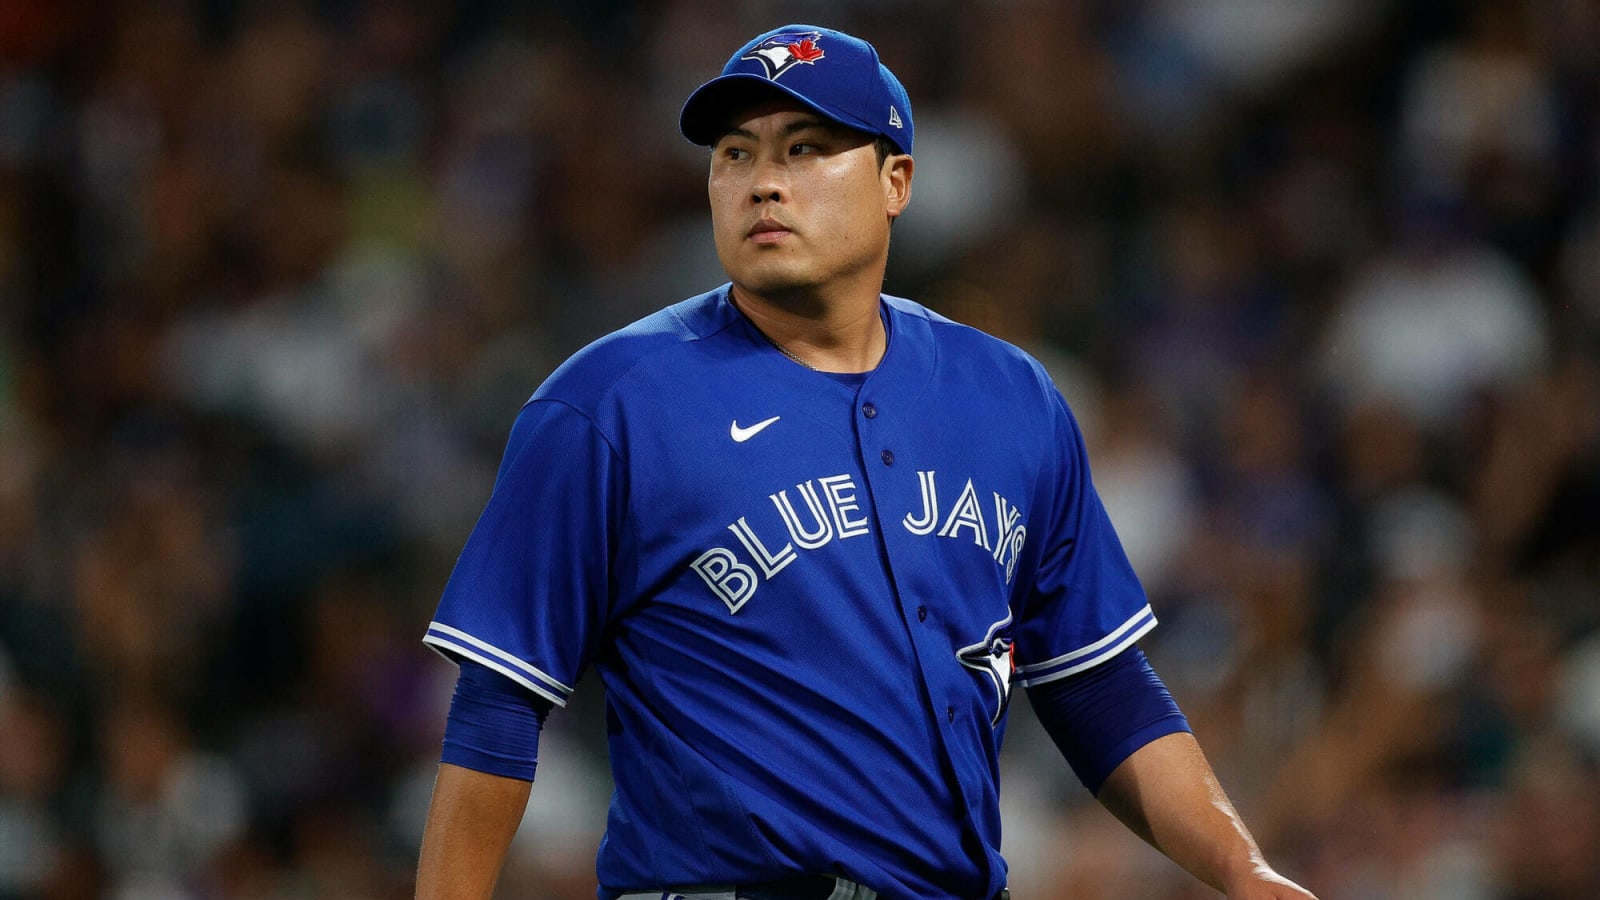 Hyun Jin Ryu remains uncertain about future: ‘Only time will tell’